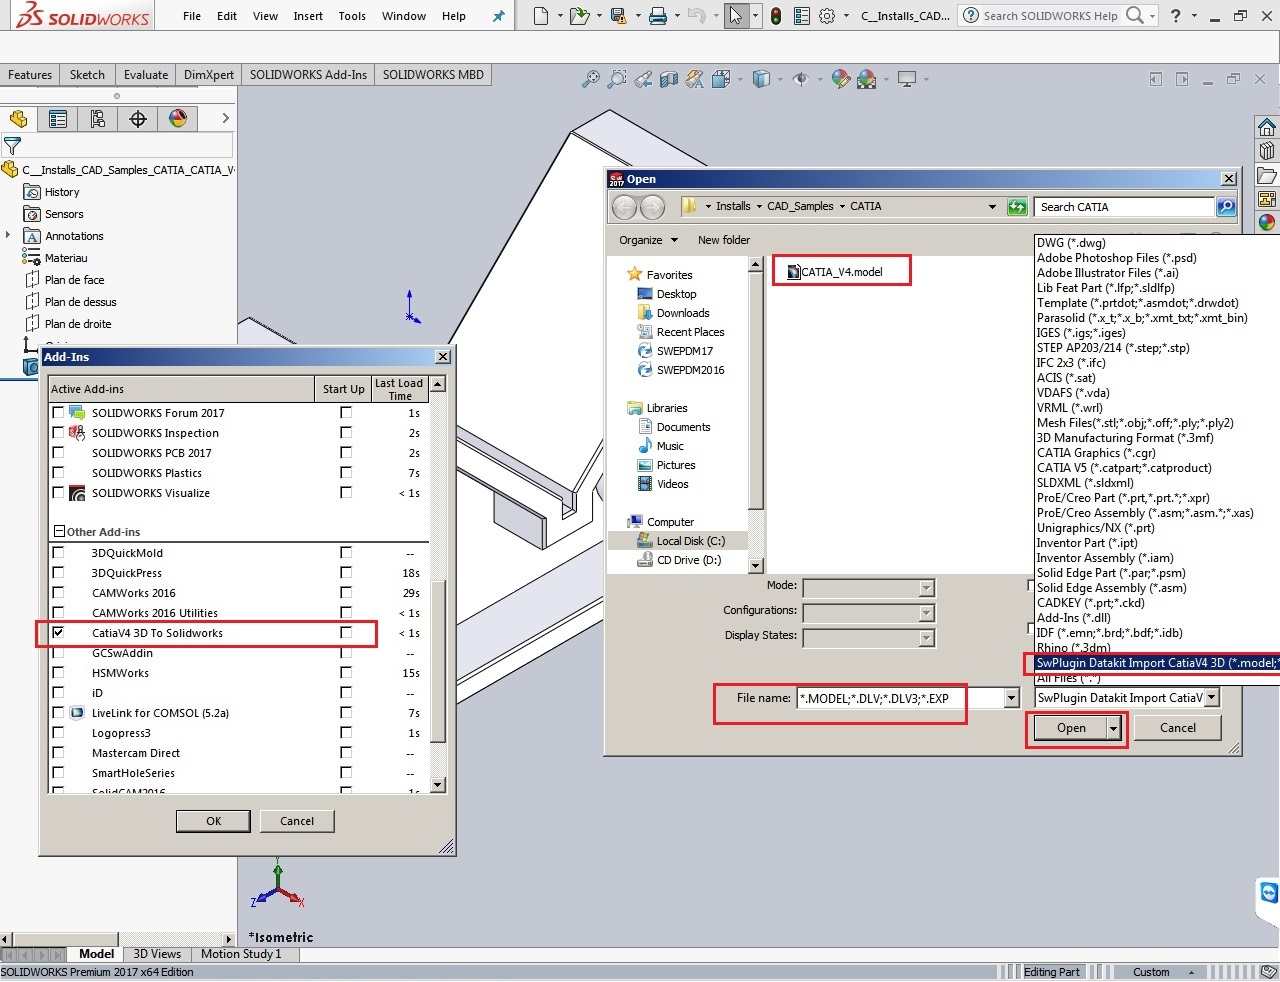 working with DATAKIT 2016 Plugins for SolidWorks 2010-2017